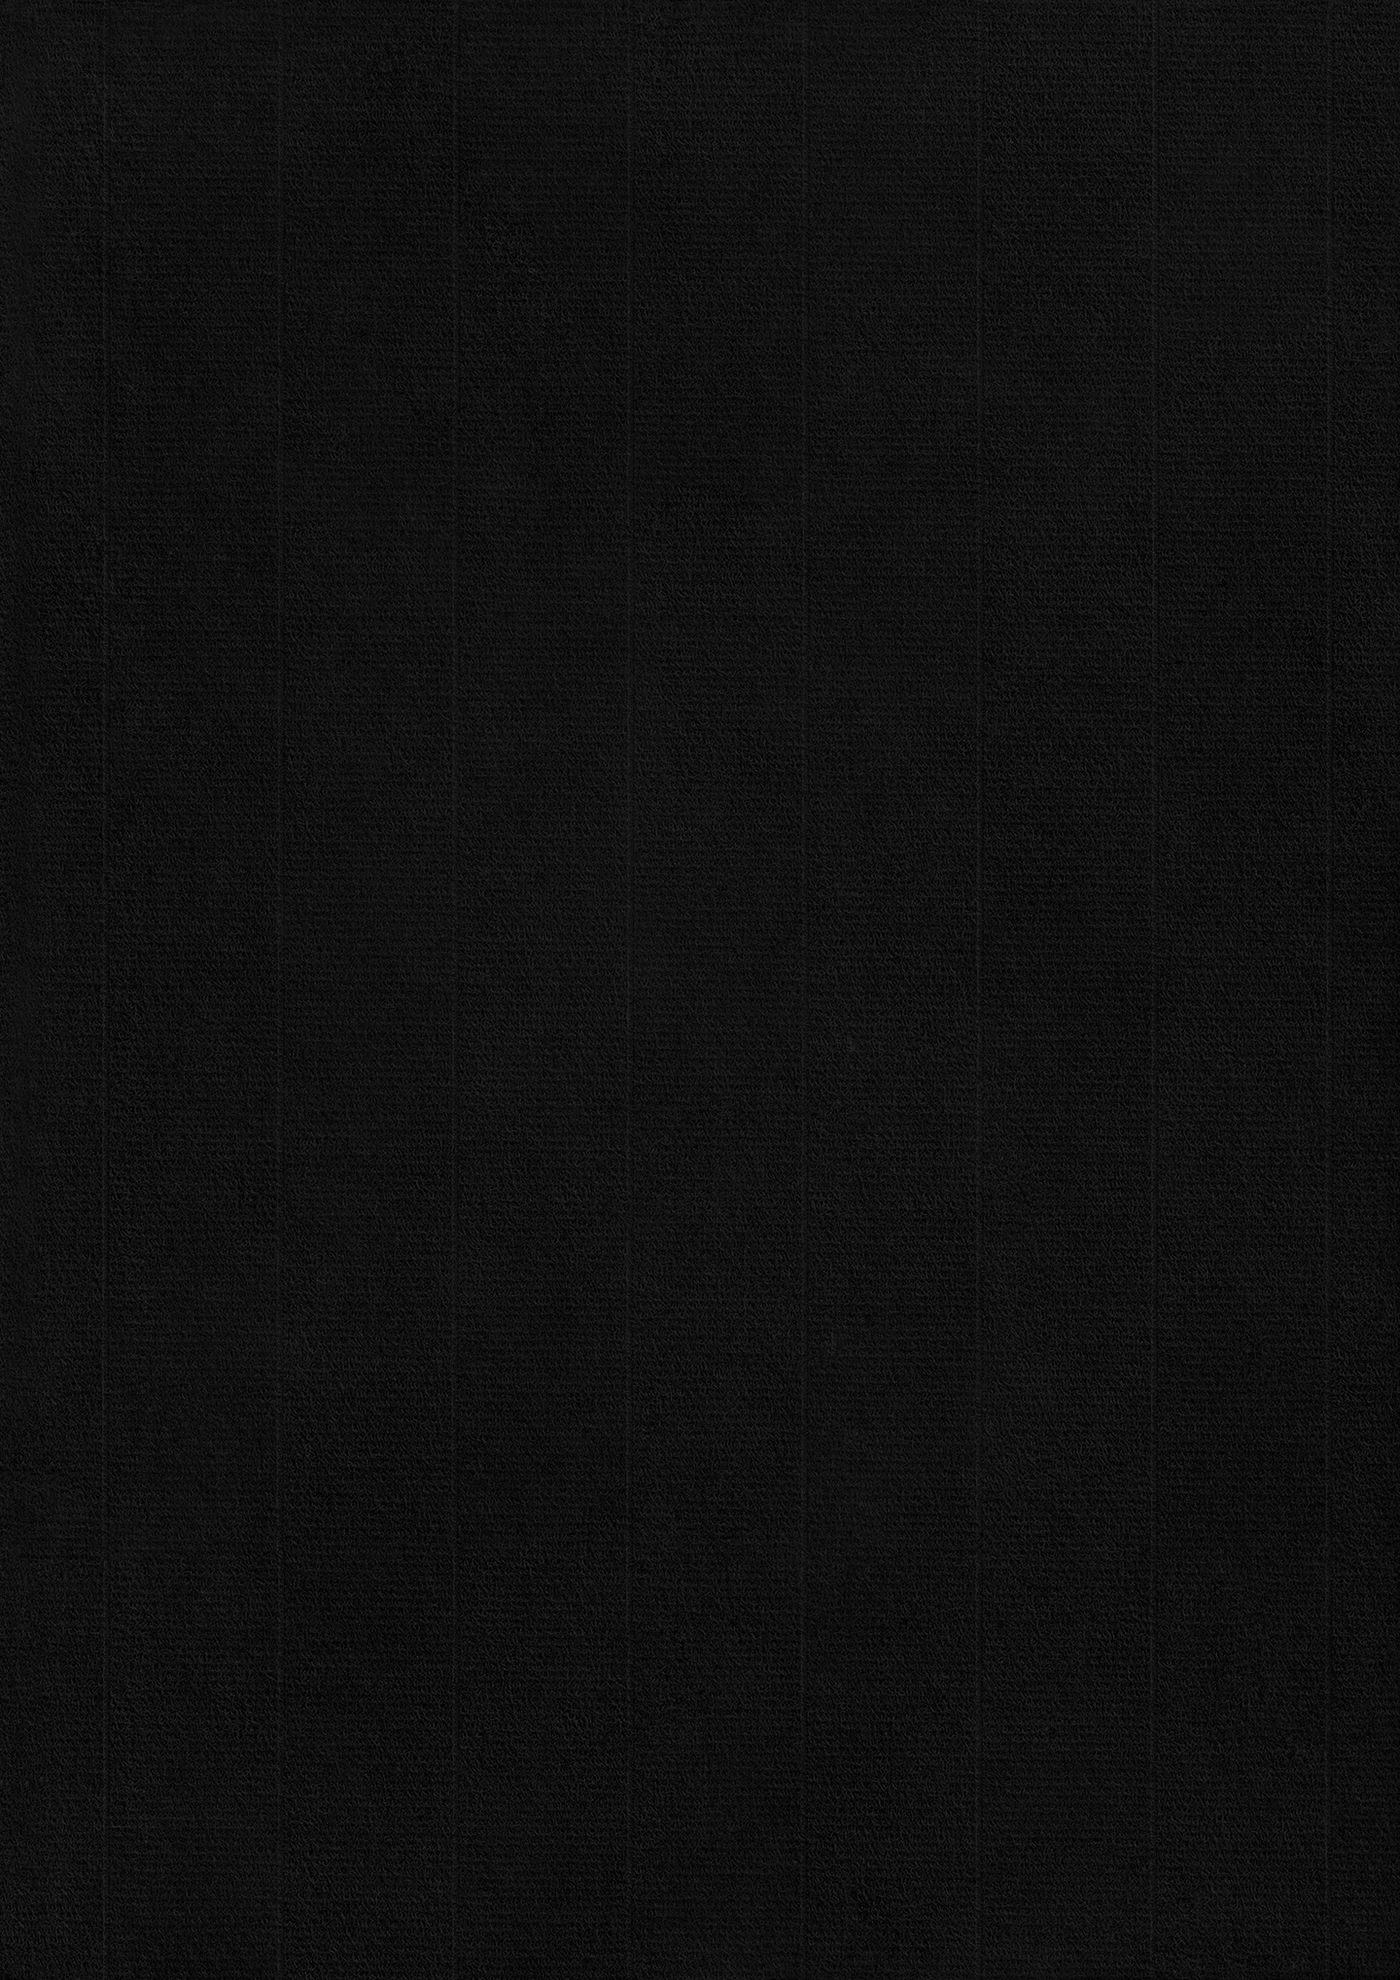 26 Black Paper Texture Backgrounds By Textures & Overlays Store ...